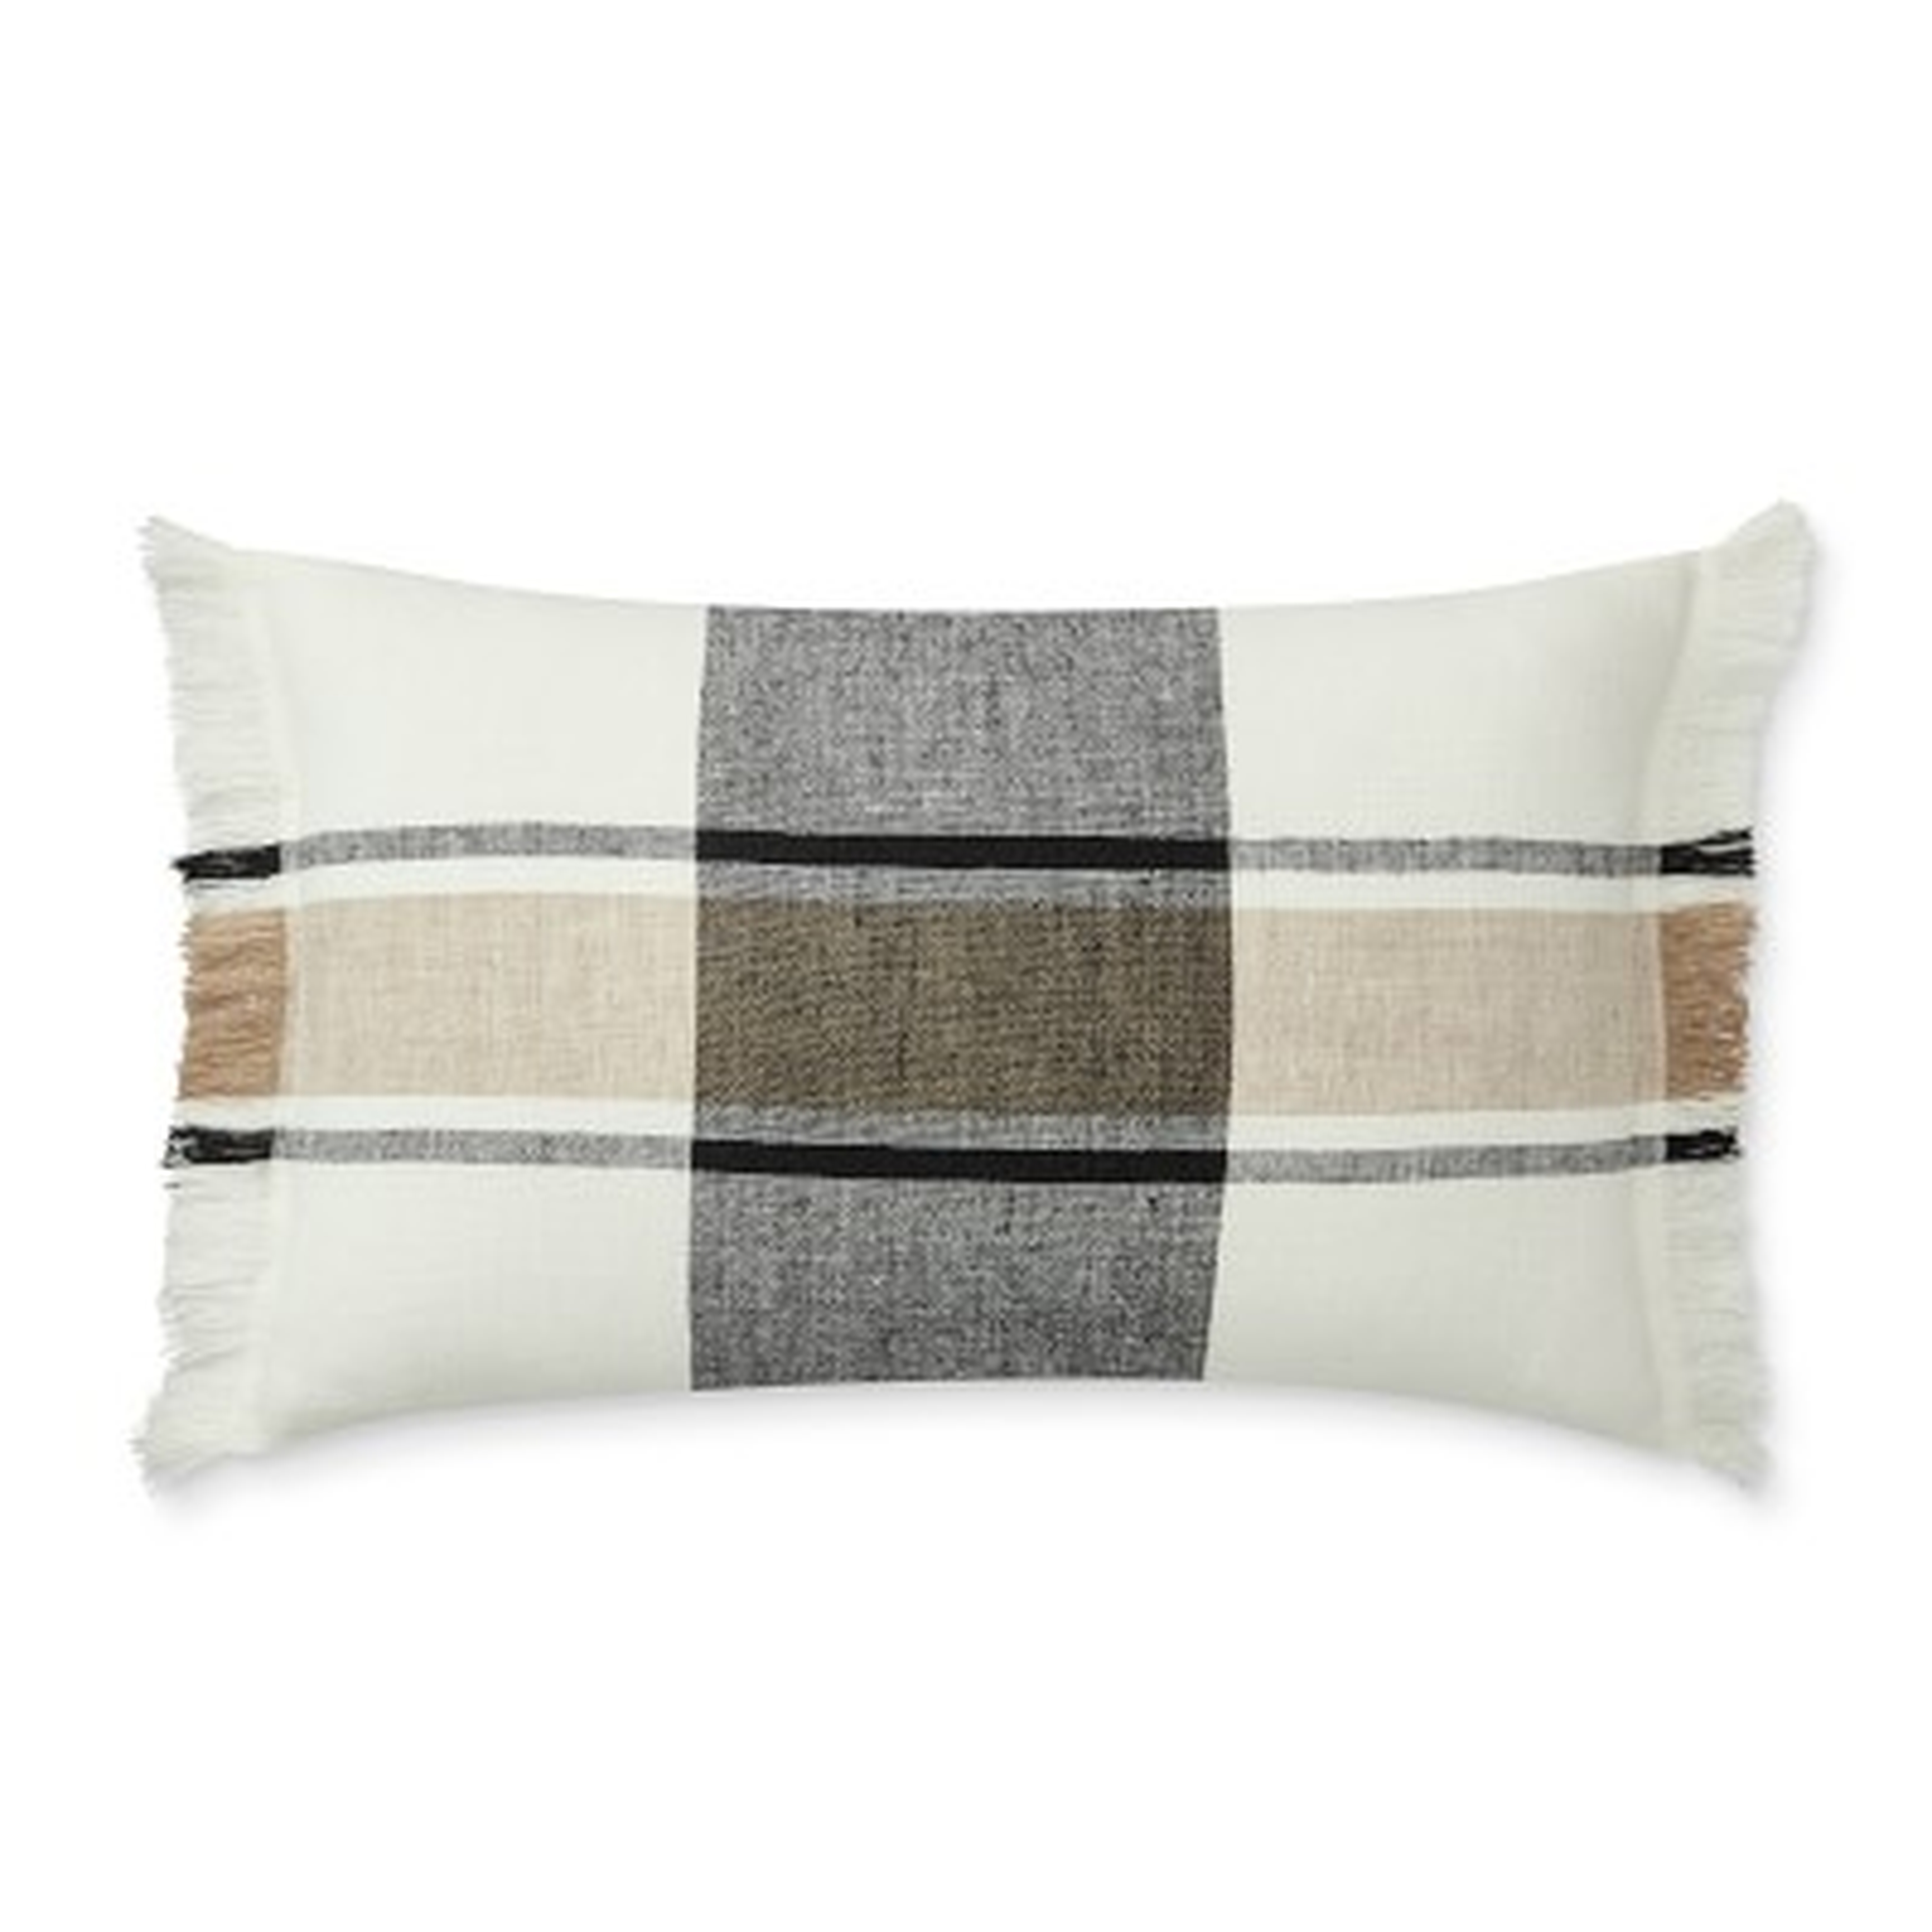 Linen Yarn Dyed Pillow Cover, Black & Beige, 22" x 14" - Williams Sonoma